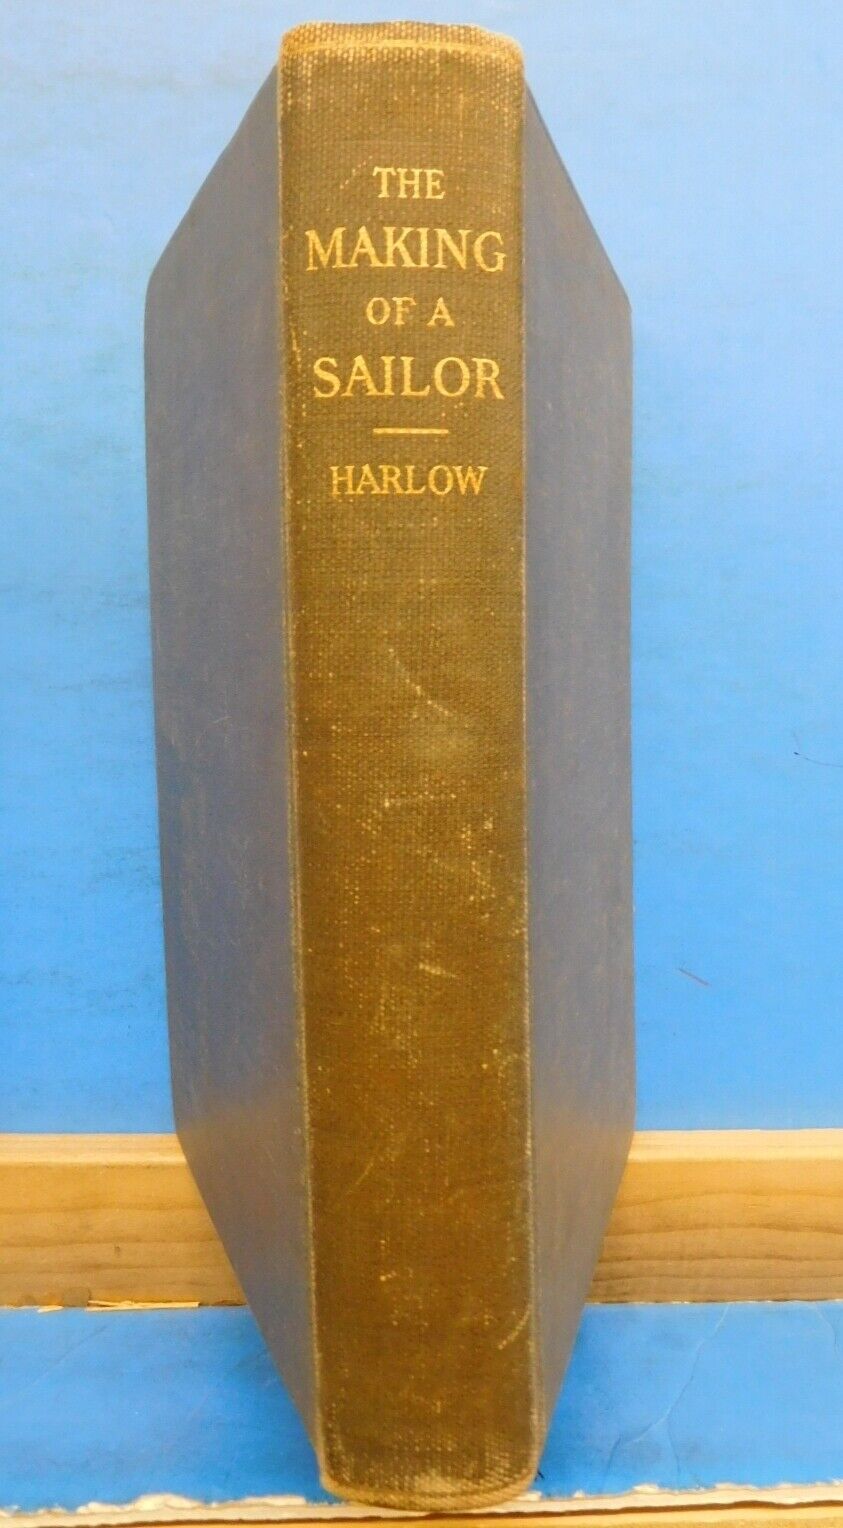 Making of a Sailor or Sea Life Aboard a Yankee Square Rigger. The by Harlow HC